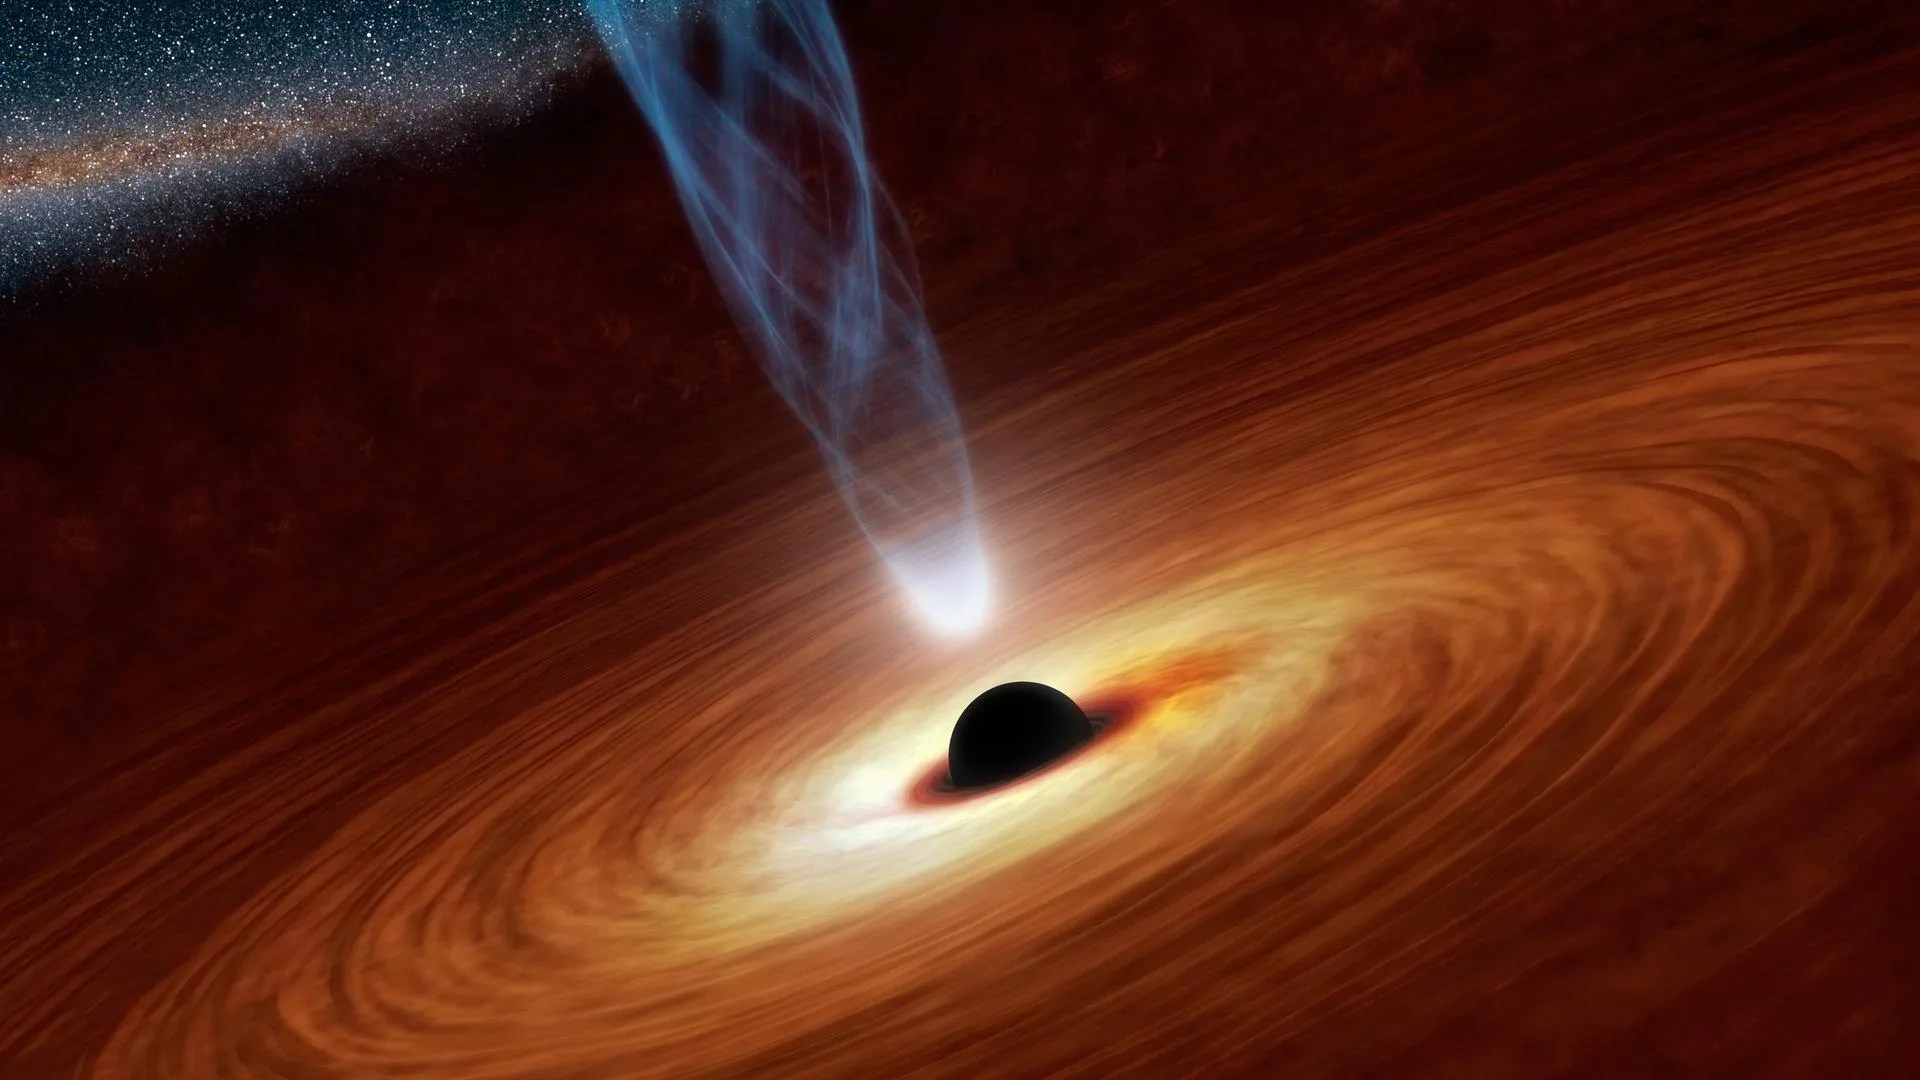 10 Questions You Might Have About Black Holes - NASA Science